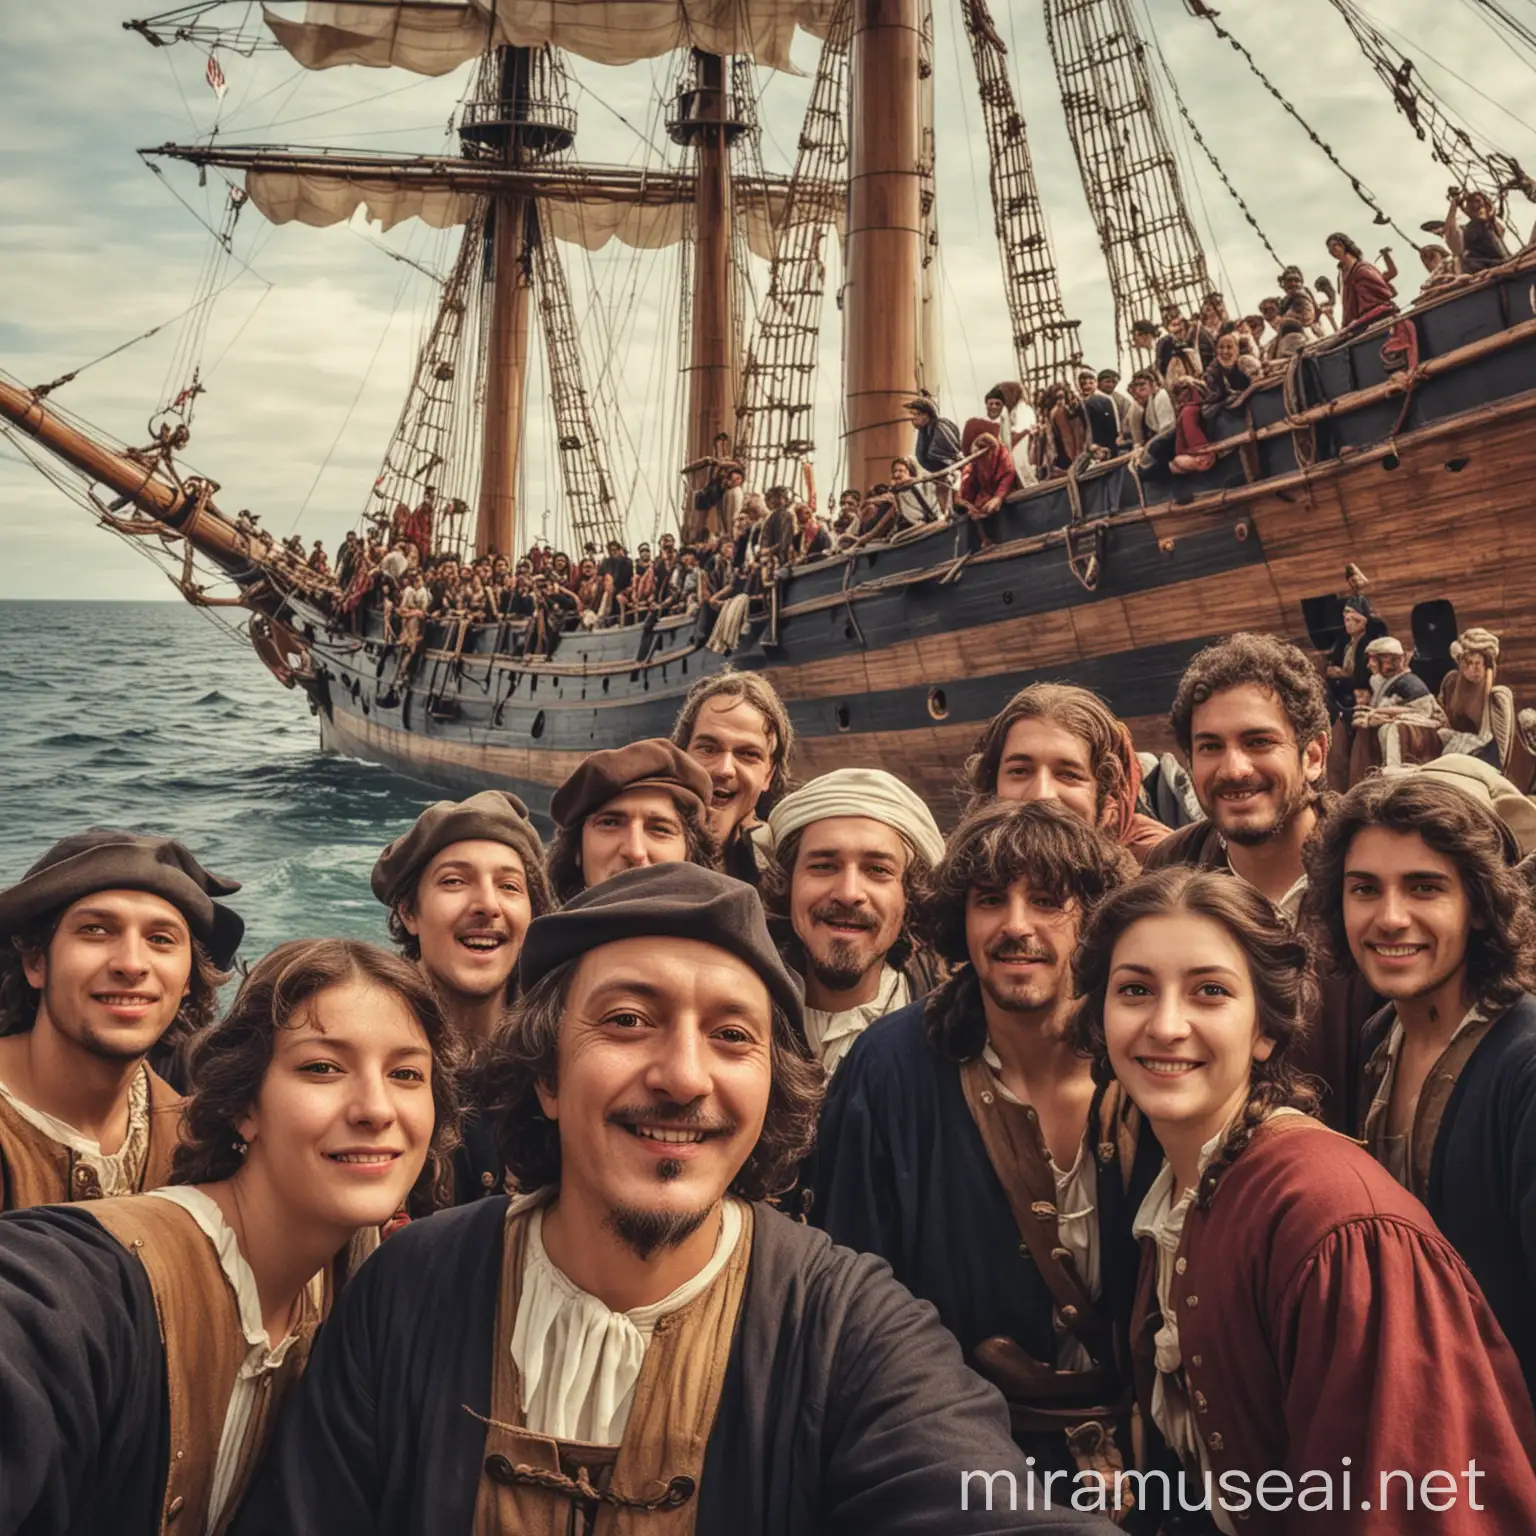 Christopher Columbus and his crew taking a selfie in front of the ship named Nina